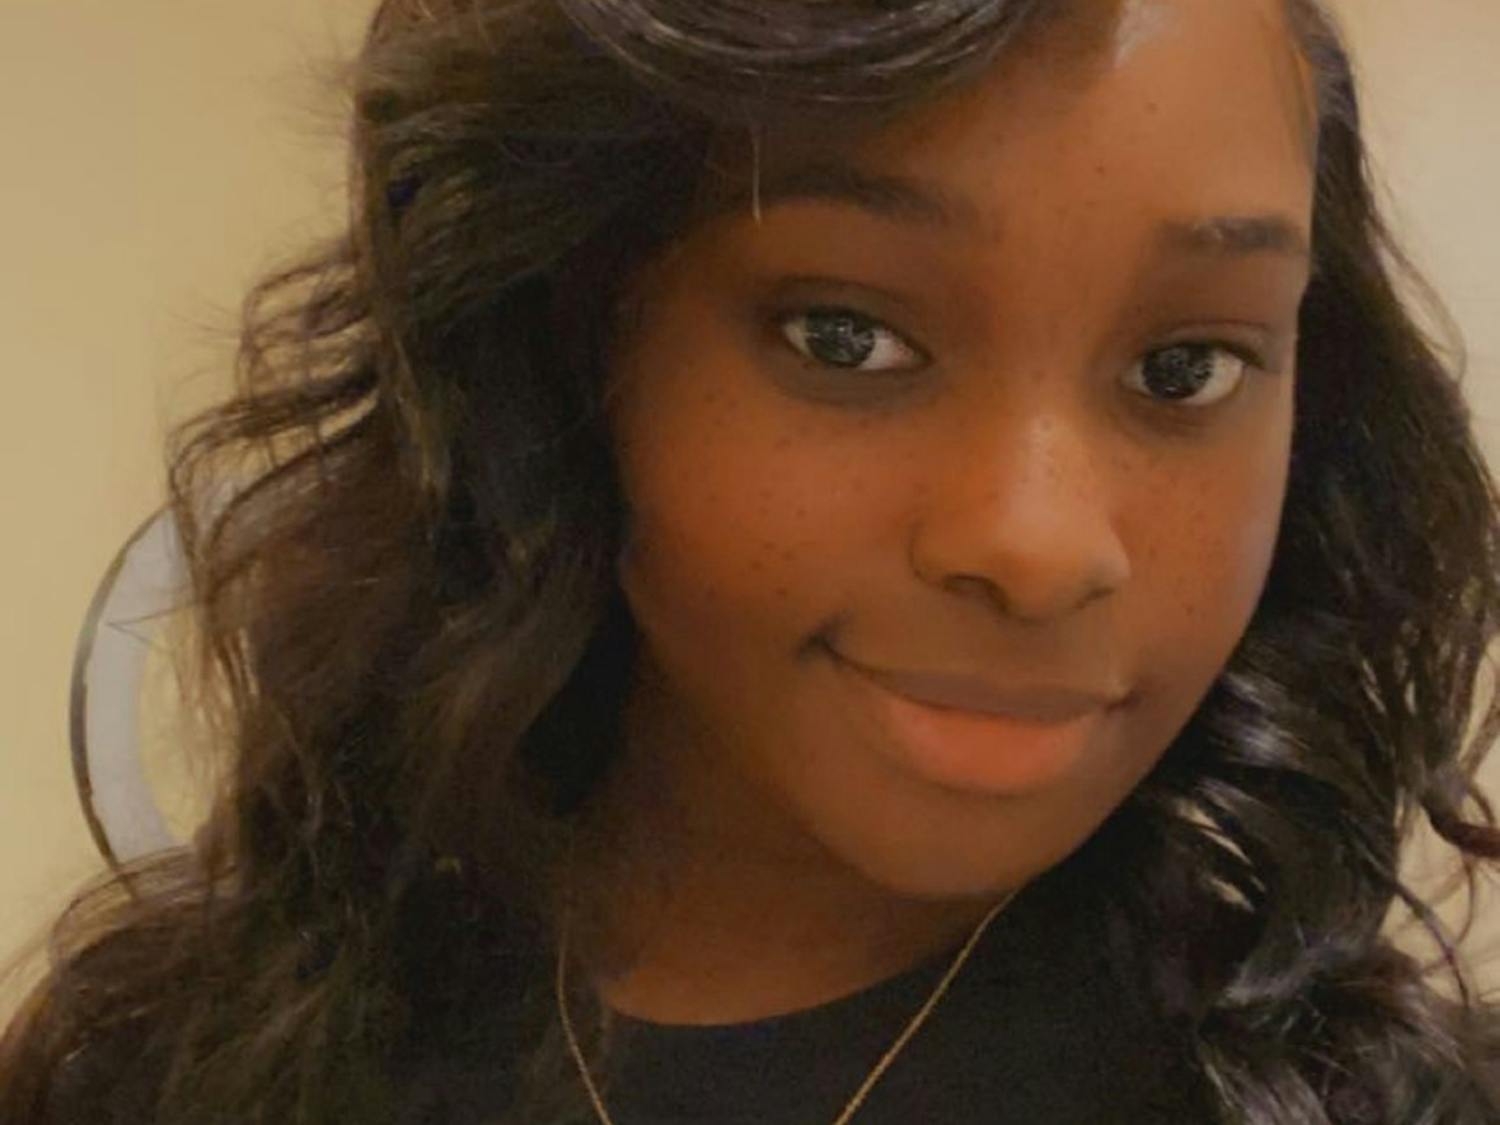 The search for 19-year-old Buffalo State student Saniyya Dennis continues more than one week after her disappearance.